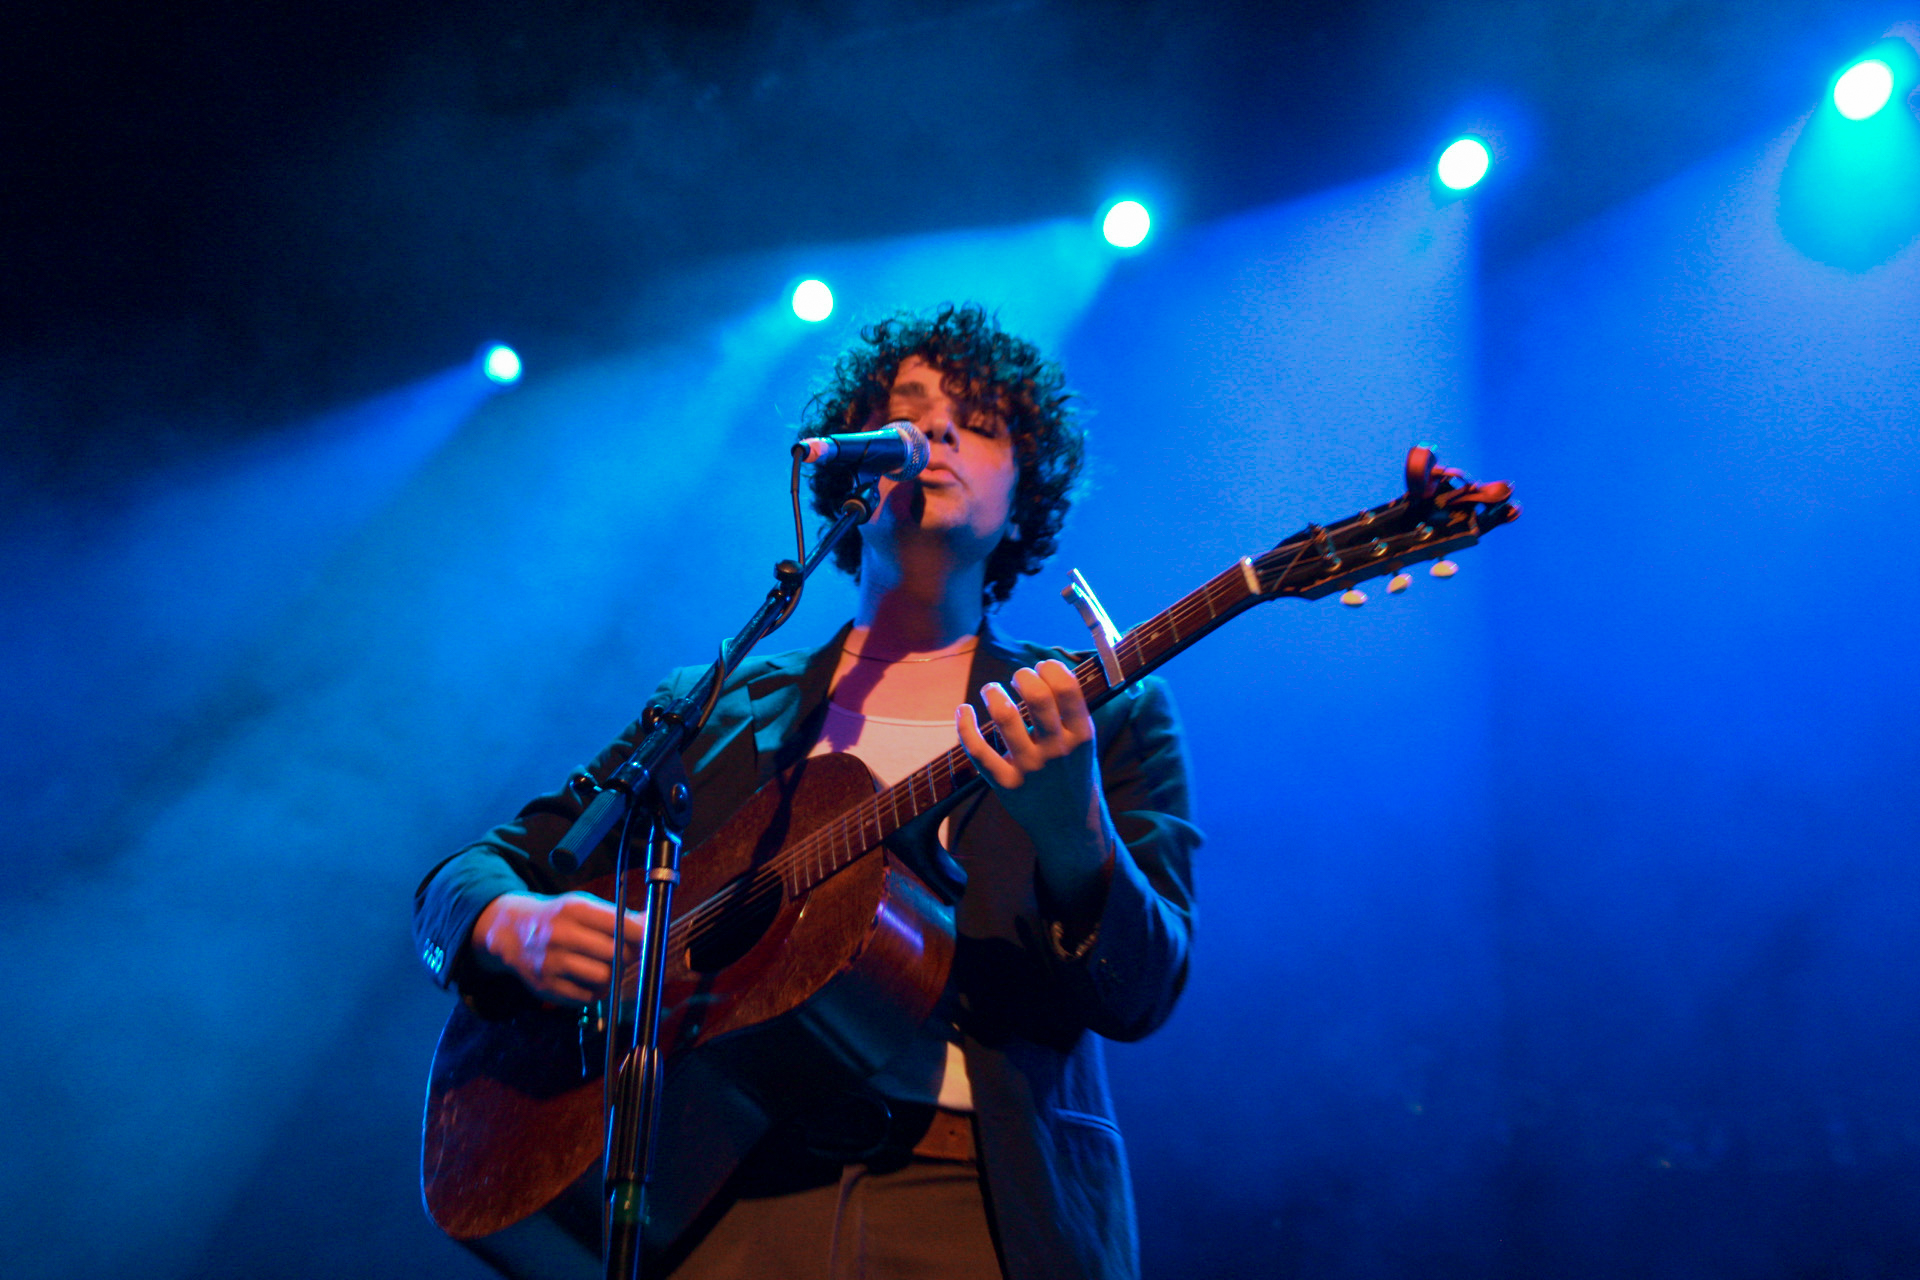  Charlie Hickey playing acoustic guitar under blue lighting in a dark suit jacket atop a white shirt. 